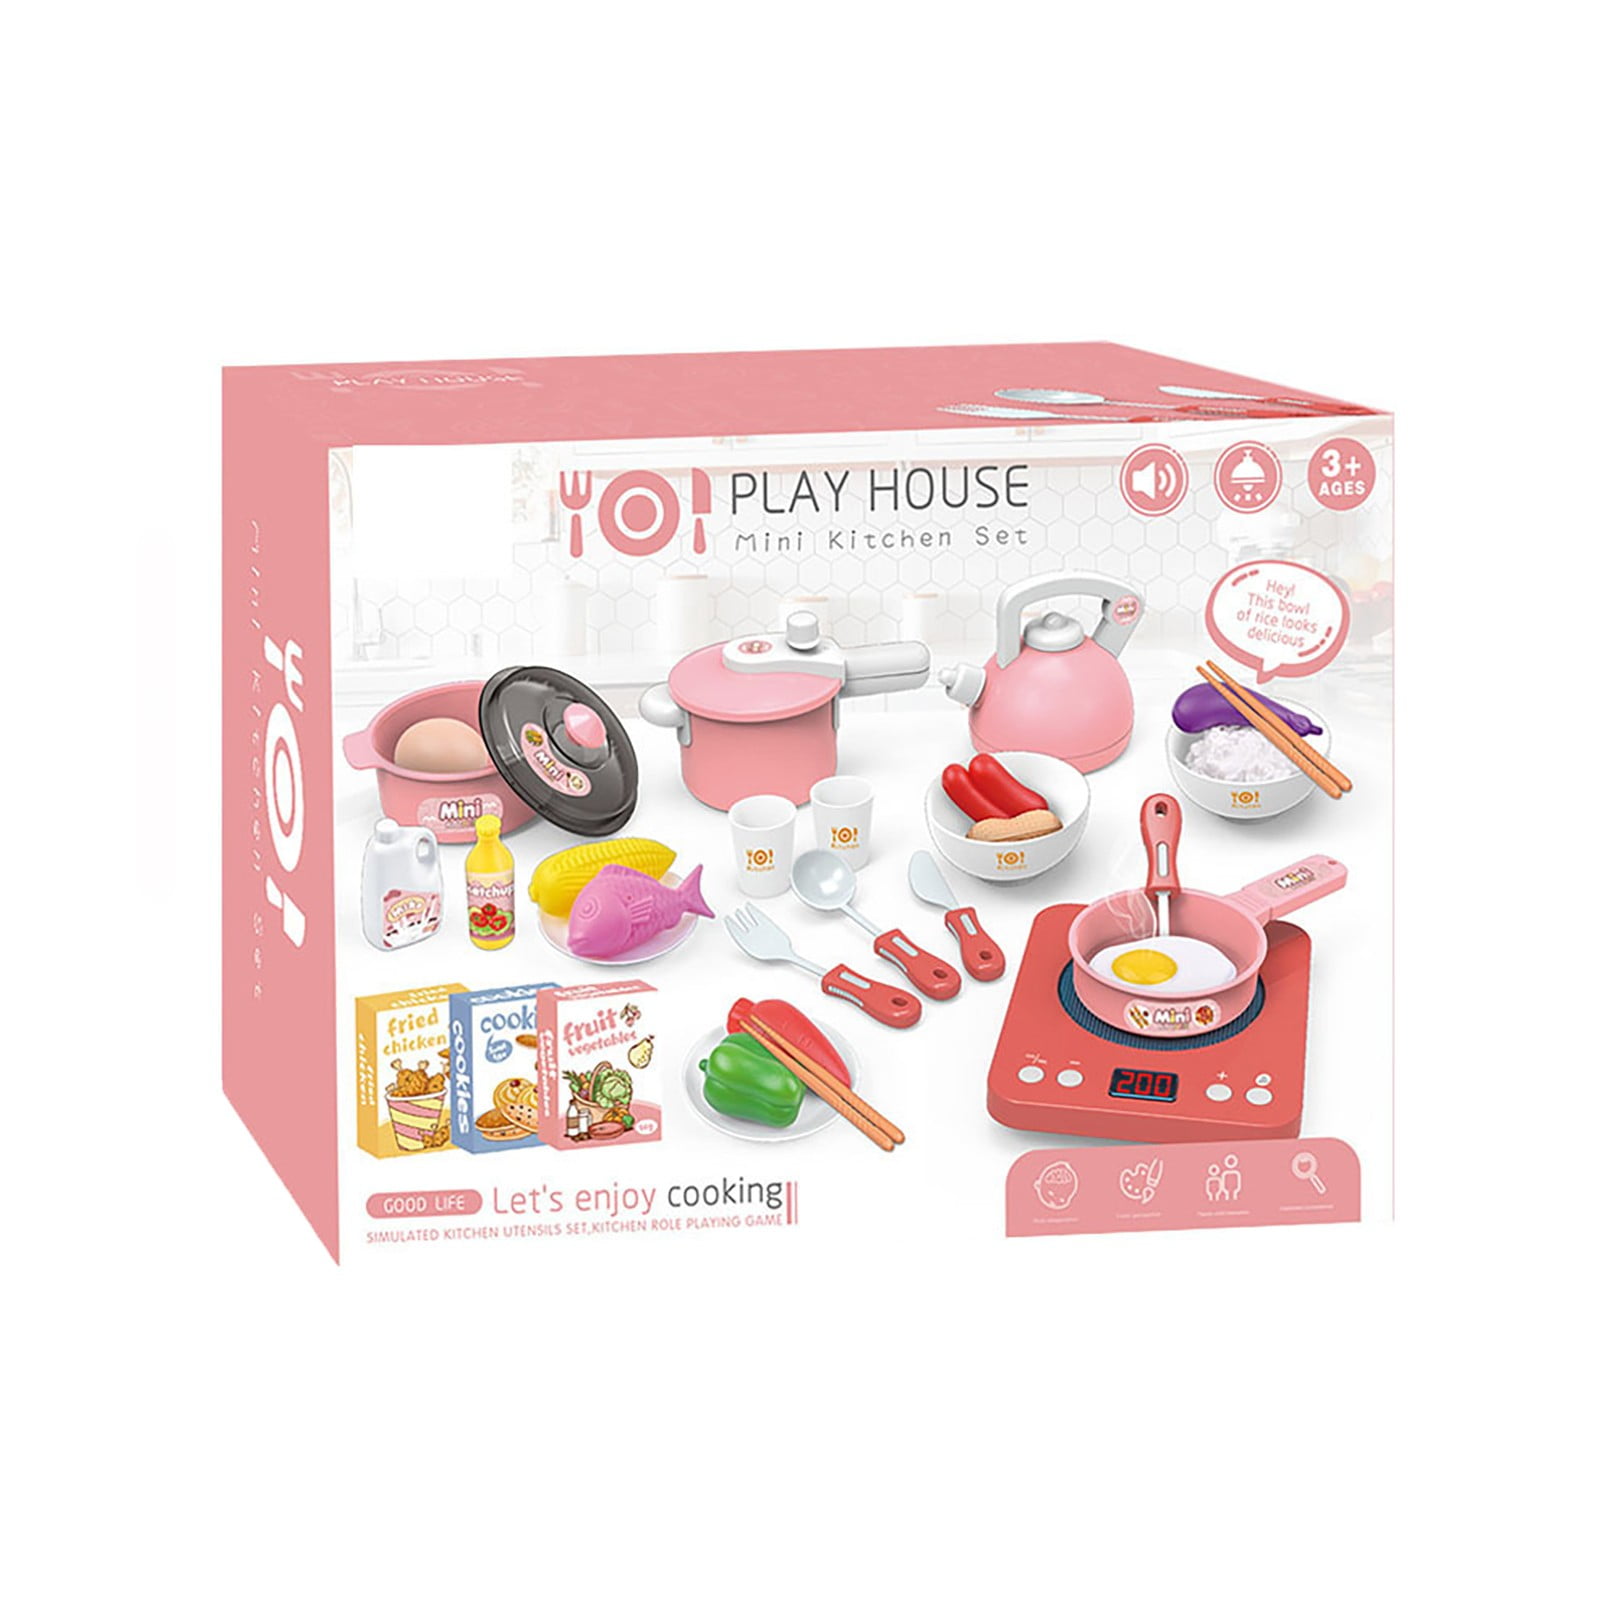 Kids Play House Toy Kitchen Utensils Tea Pots Cooking Cookware Educational Games 